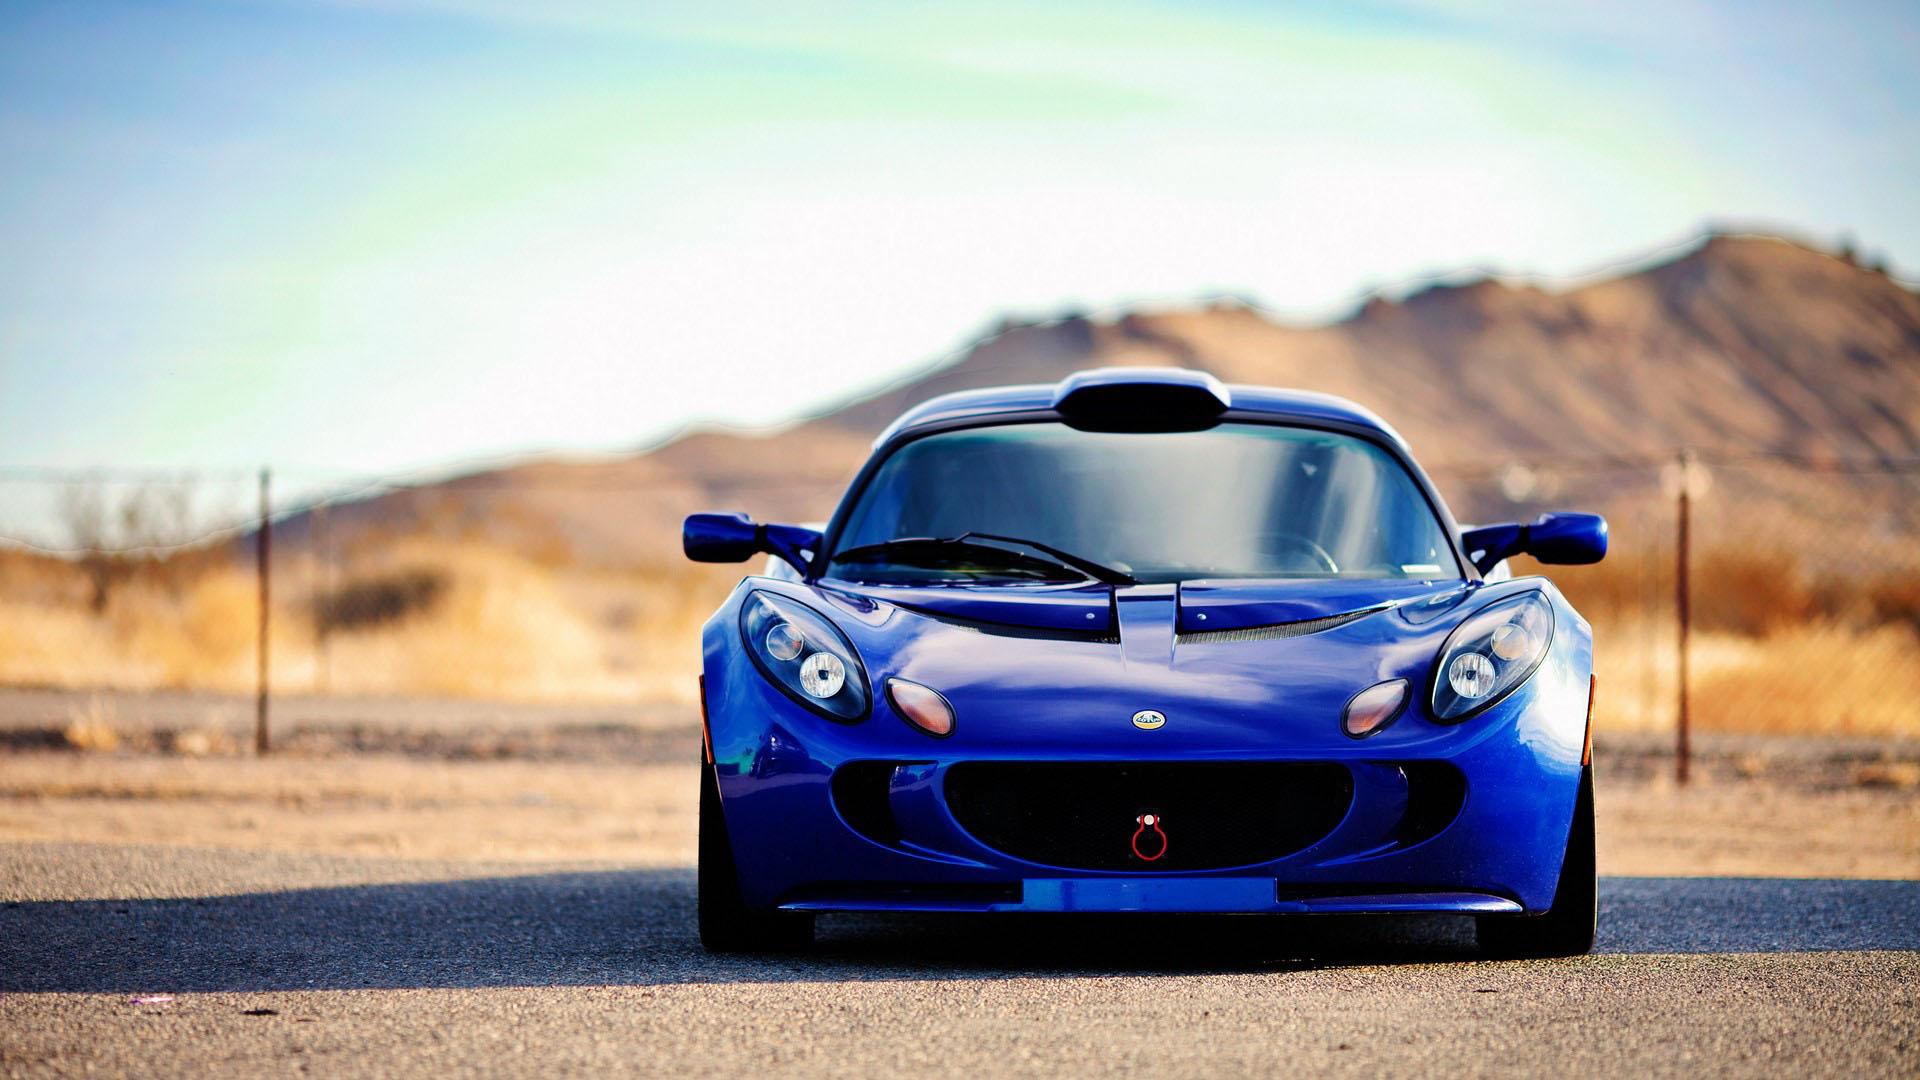 MRO23: Lotus Elise Wallpaper in Best Resolutions, HDQ Cover